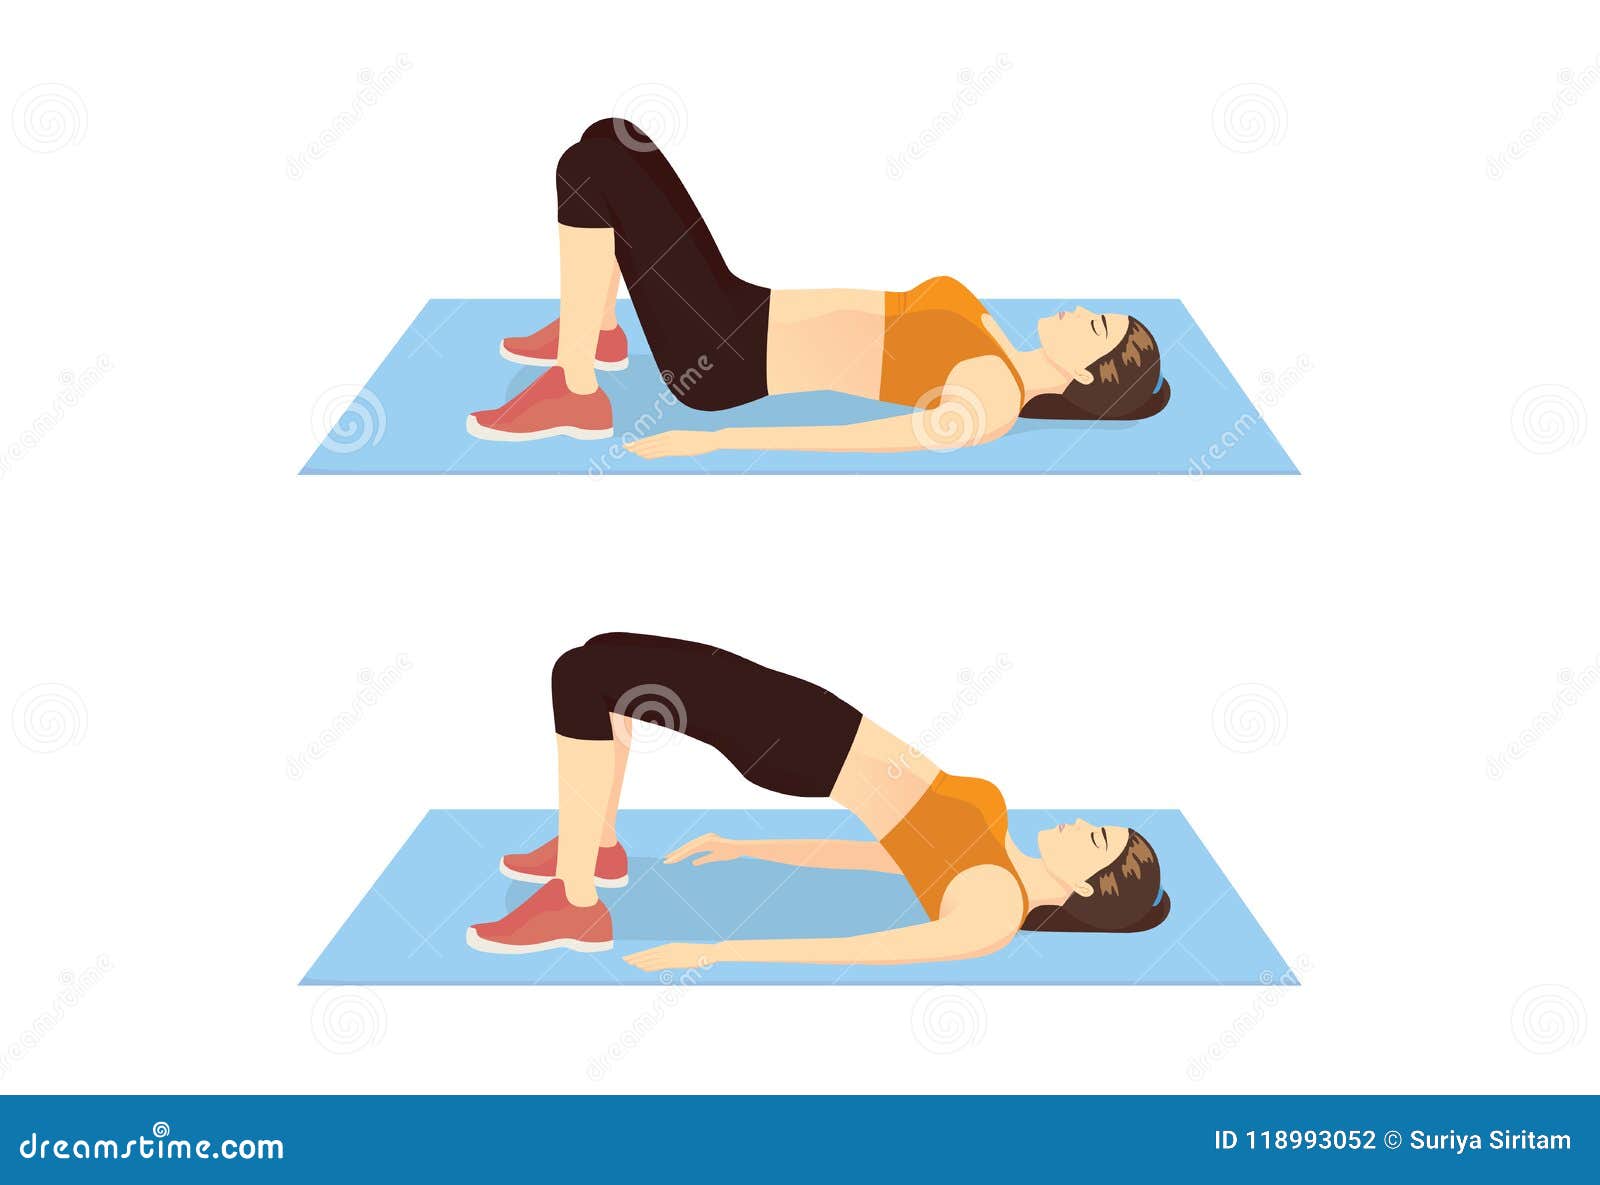 https://thumbs.dreamstime.com/z/woman-doing-exercise-hip-lift-firming-her-body-illustration-step-butt-exercise-woman-doing-exercise-hip-118993052.jpg